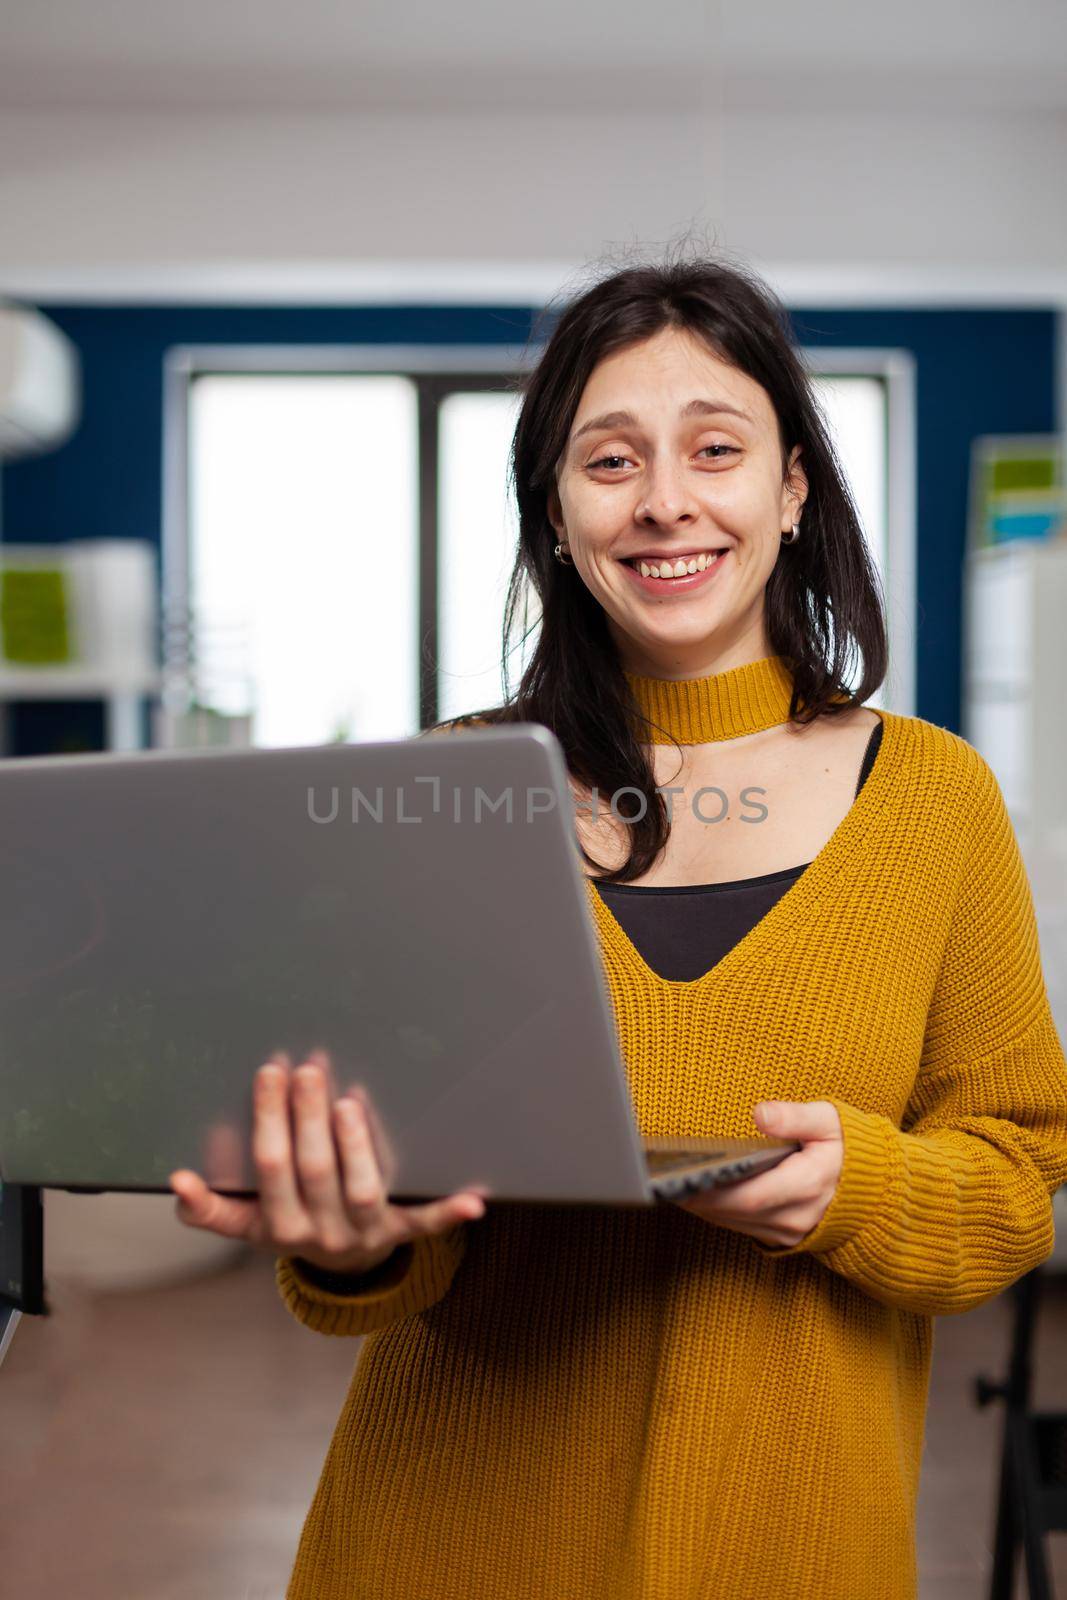 Woman retoucher looking at camera smiling working in creative media agency standing in multimedia company holding laptop. Photographer graphic editor working in start up office at digital assets.